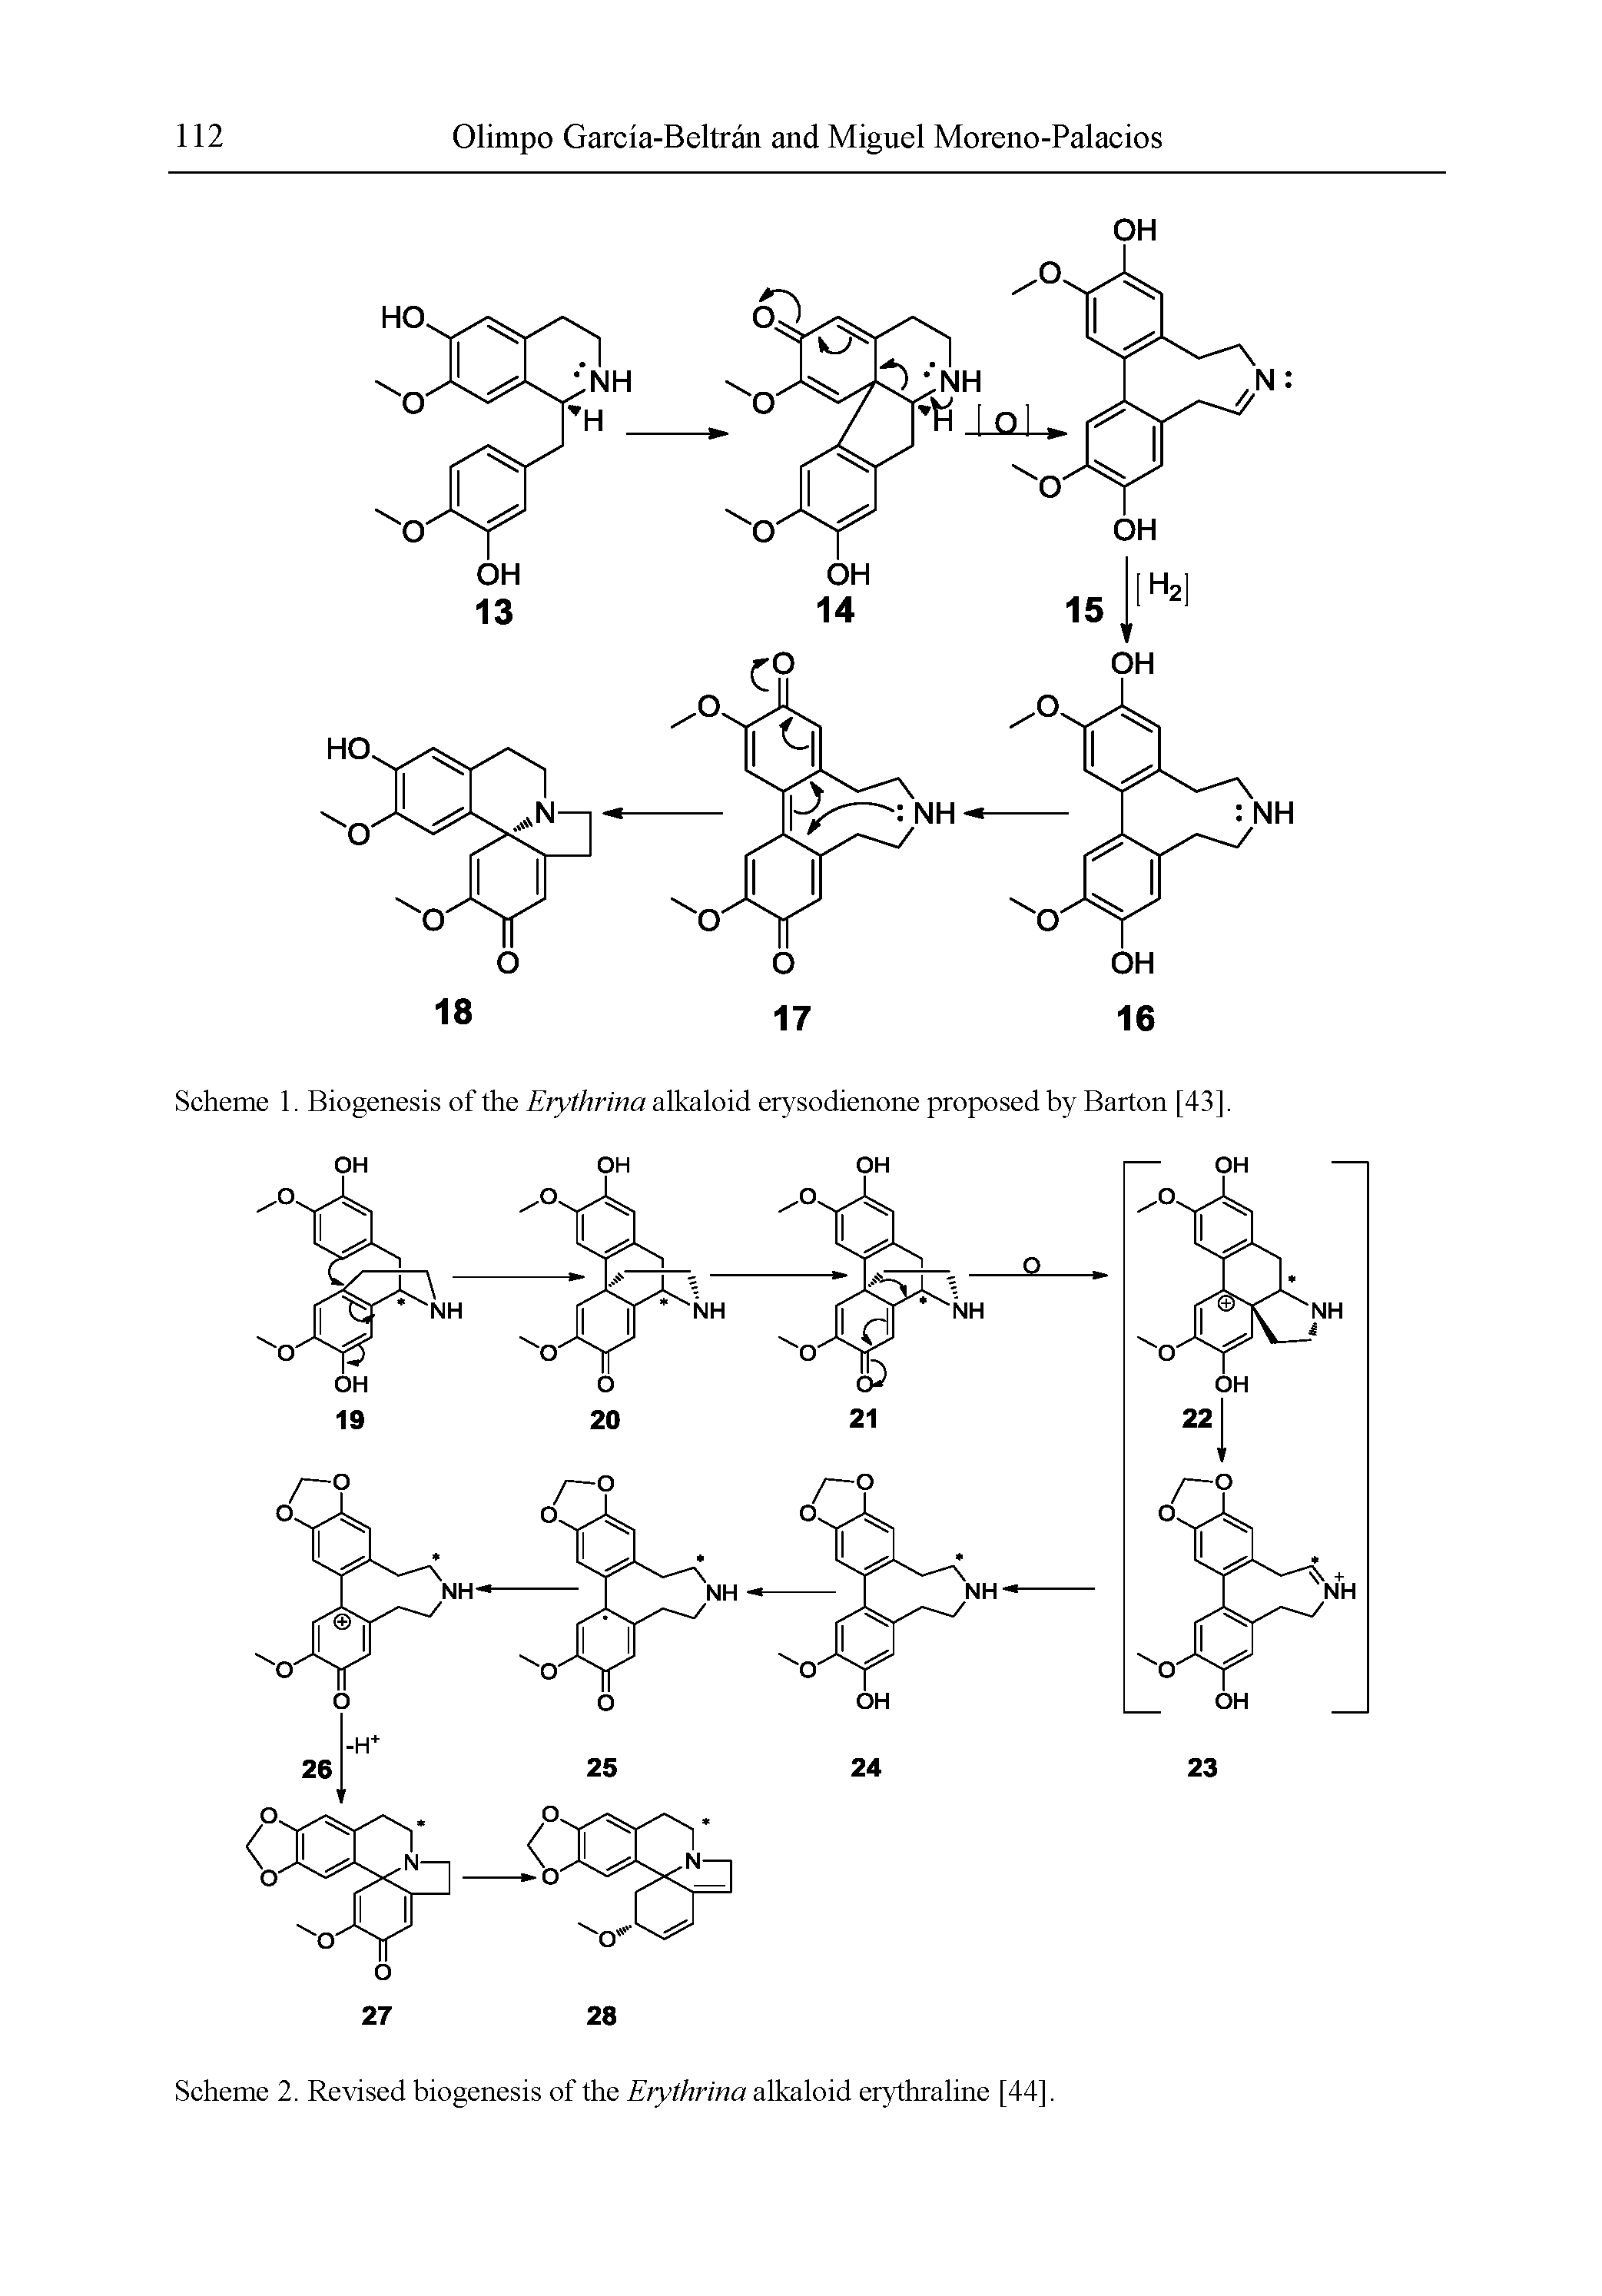 Scheme 1. Biogenesis of the Erythrina alkaloid erysodienone proposed by Barton [43] OH OH OH...